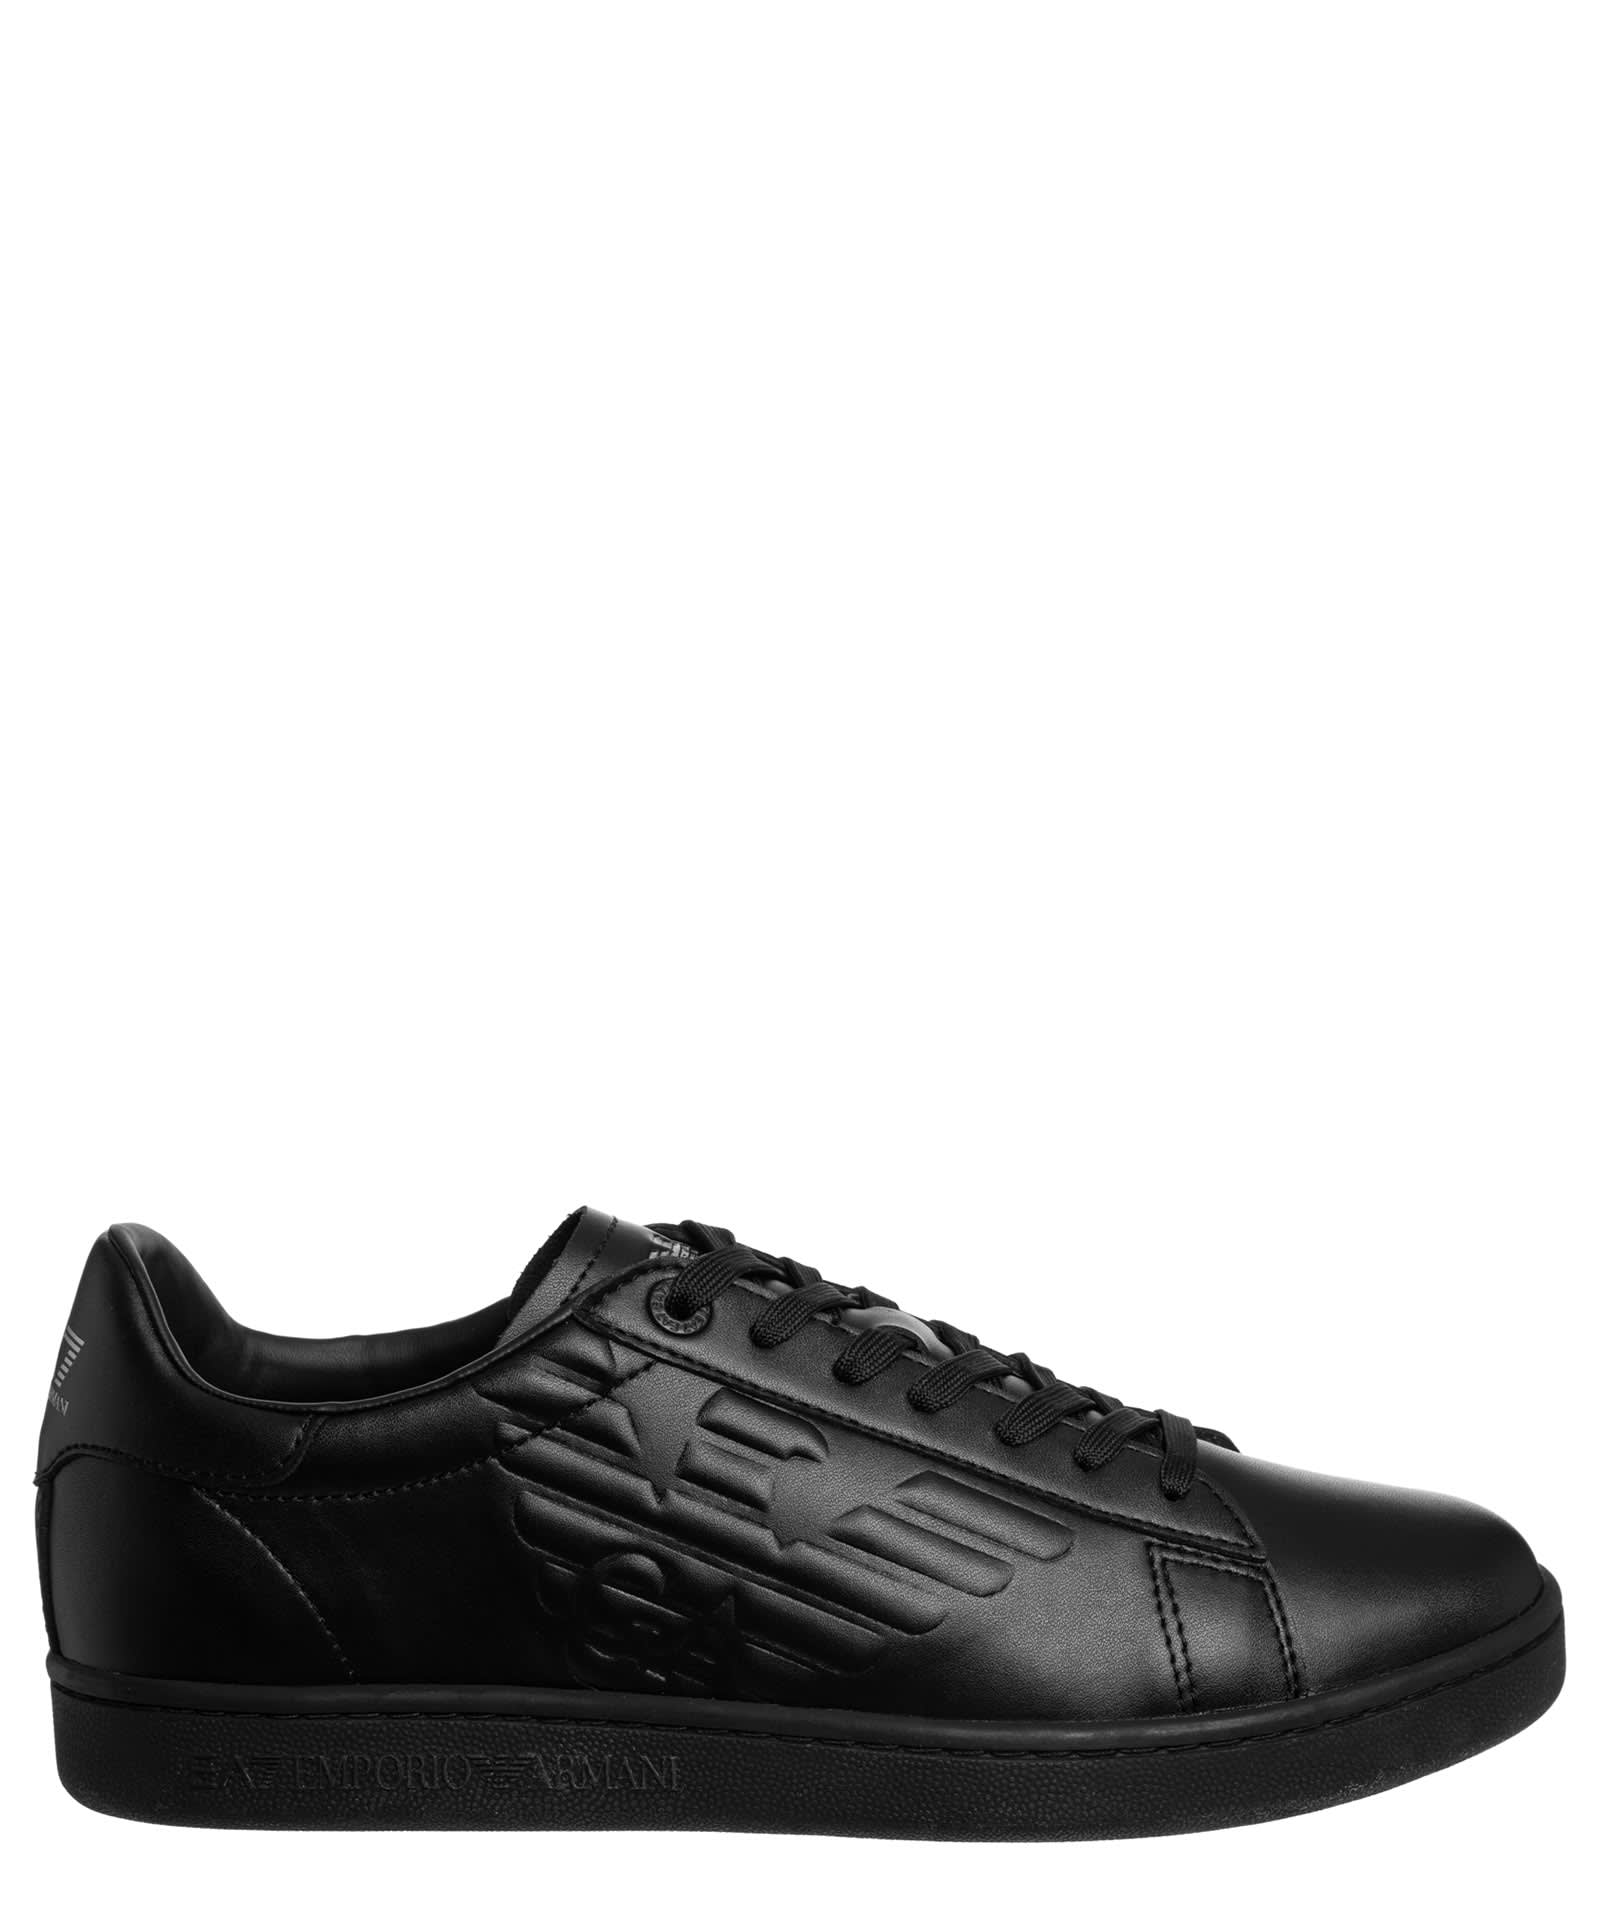 Classic New Cc Leather Sneakers